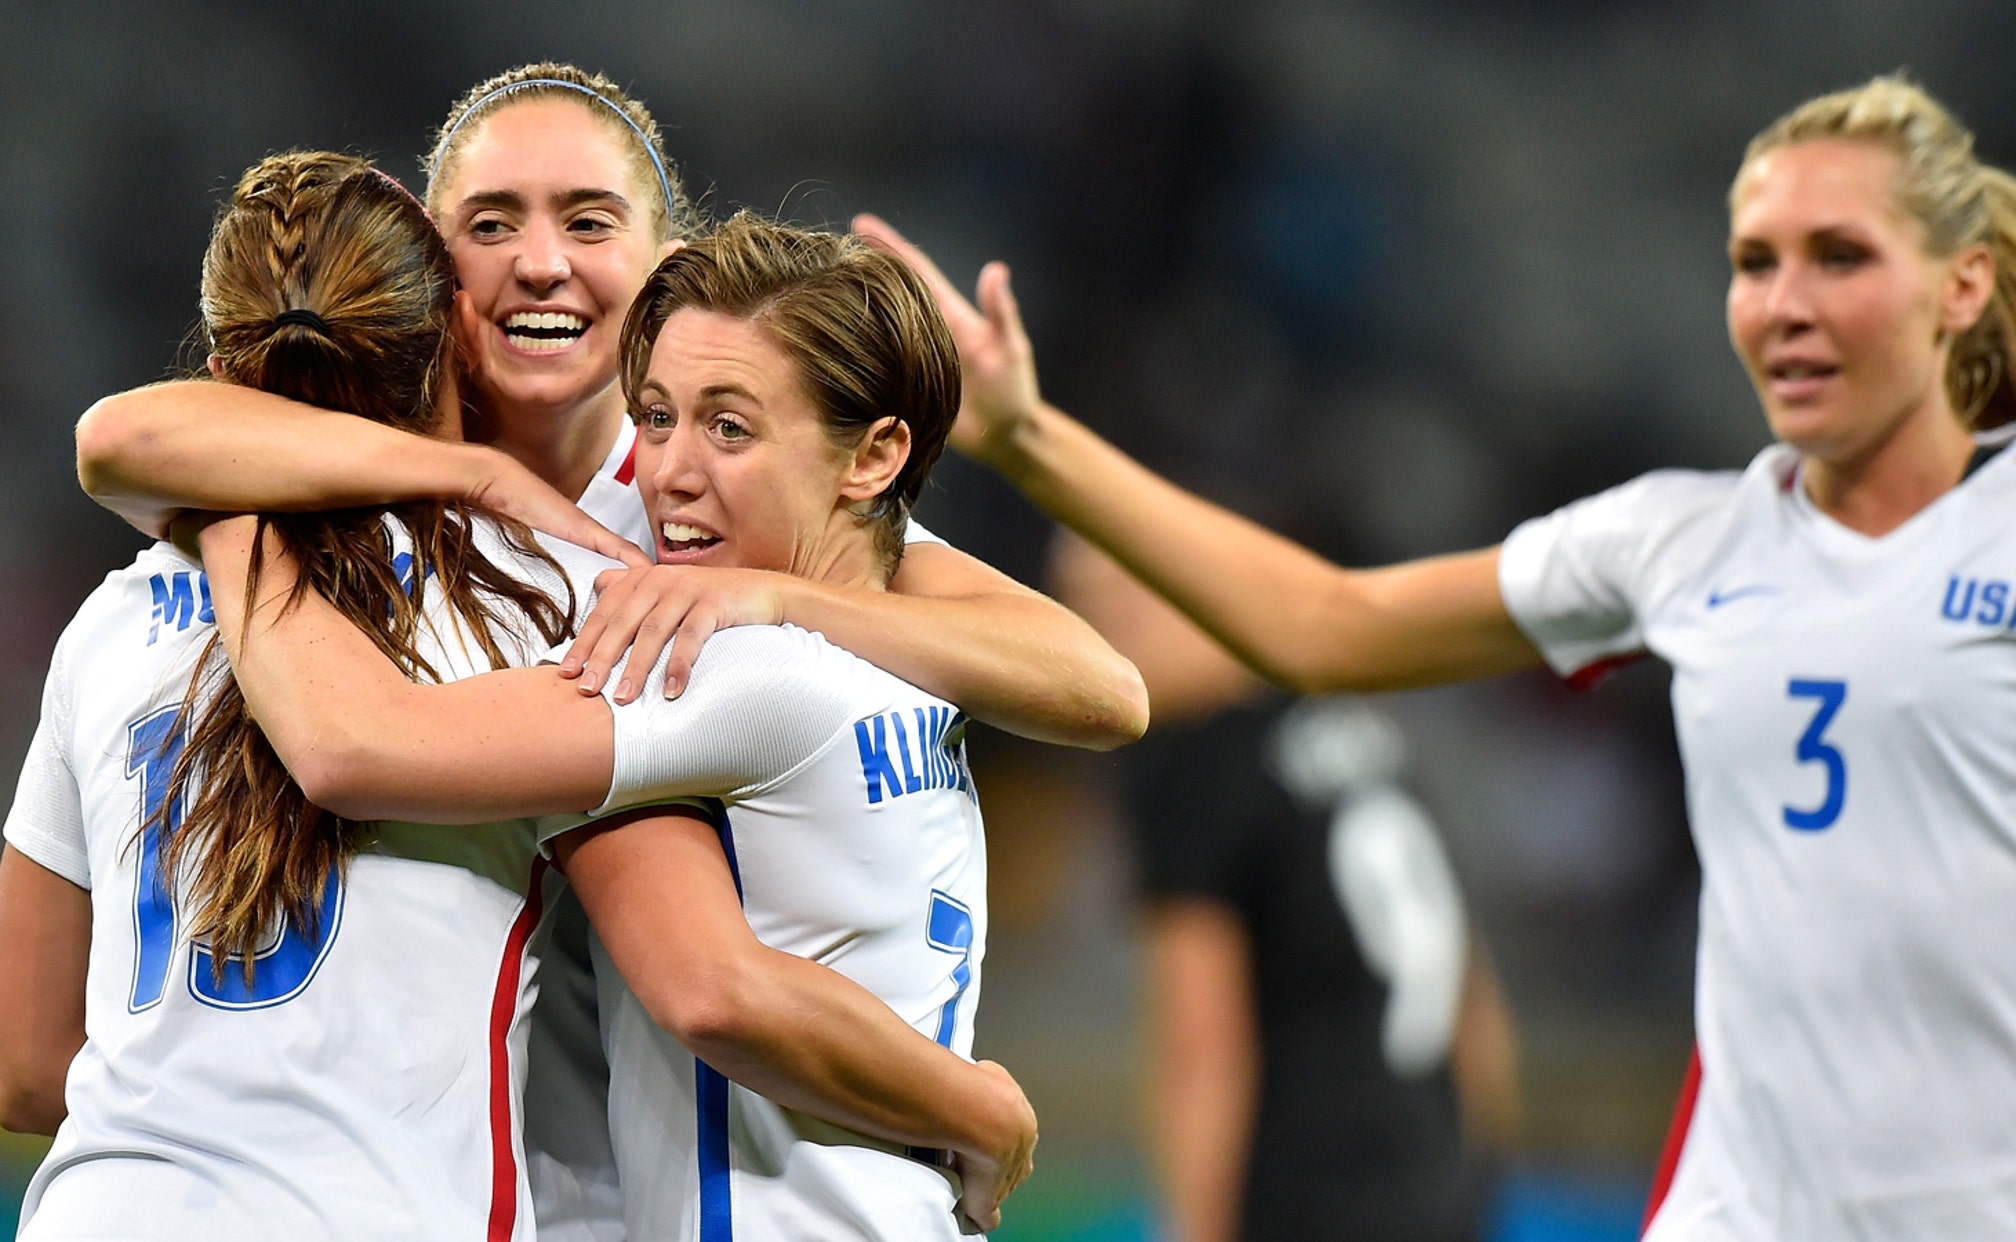 What does the USWNT's path to Olympic gold look like? FOX Sports